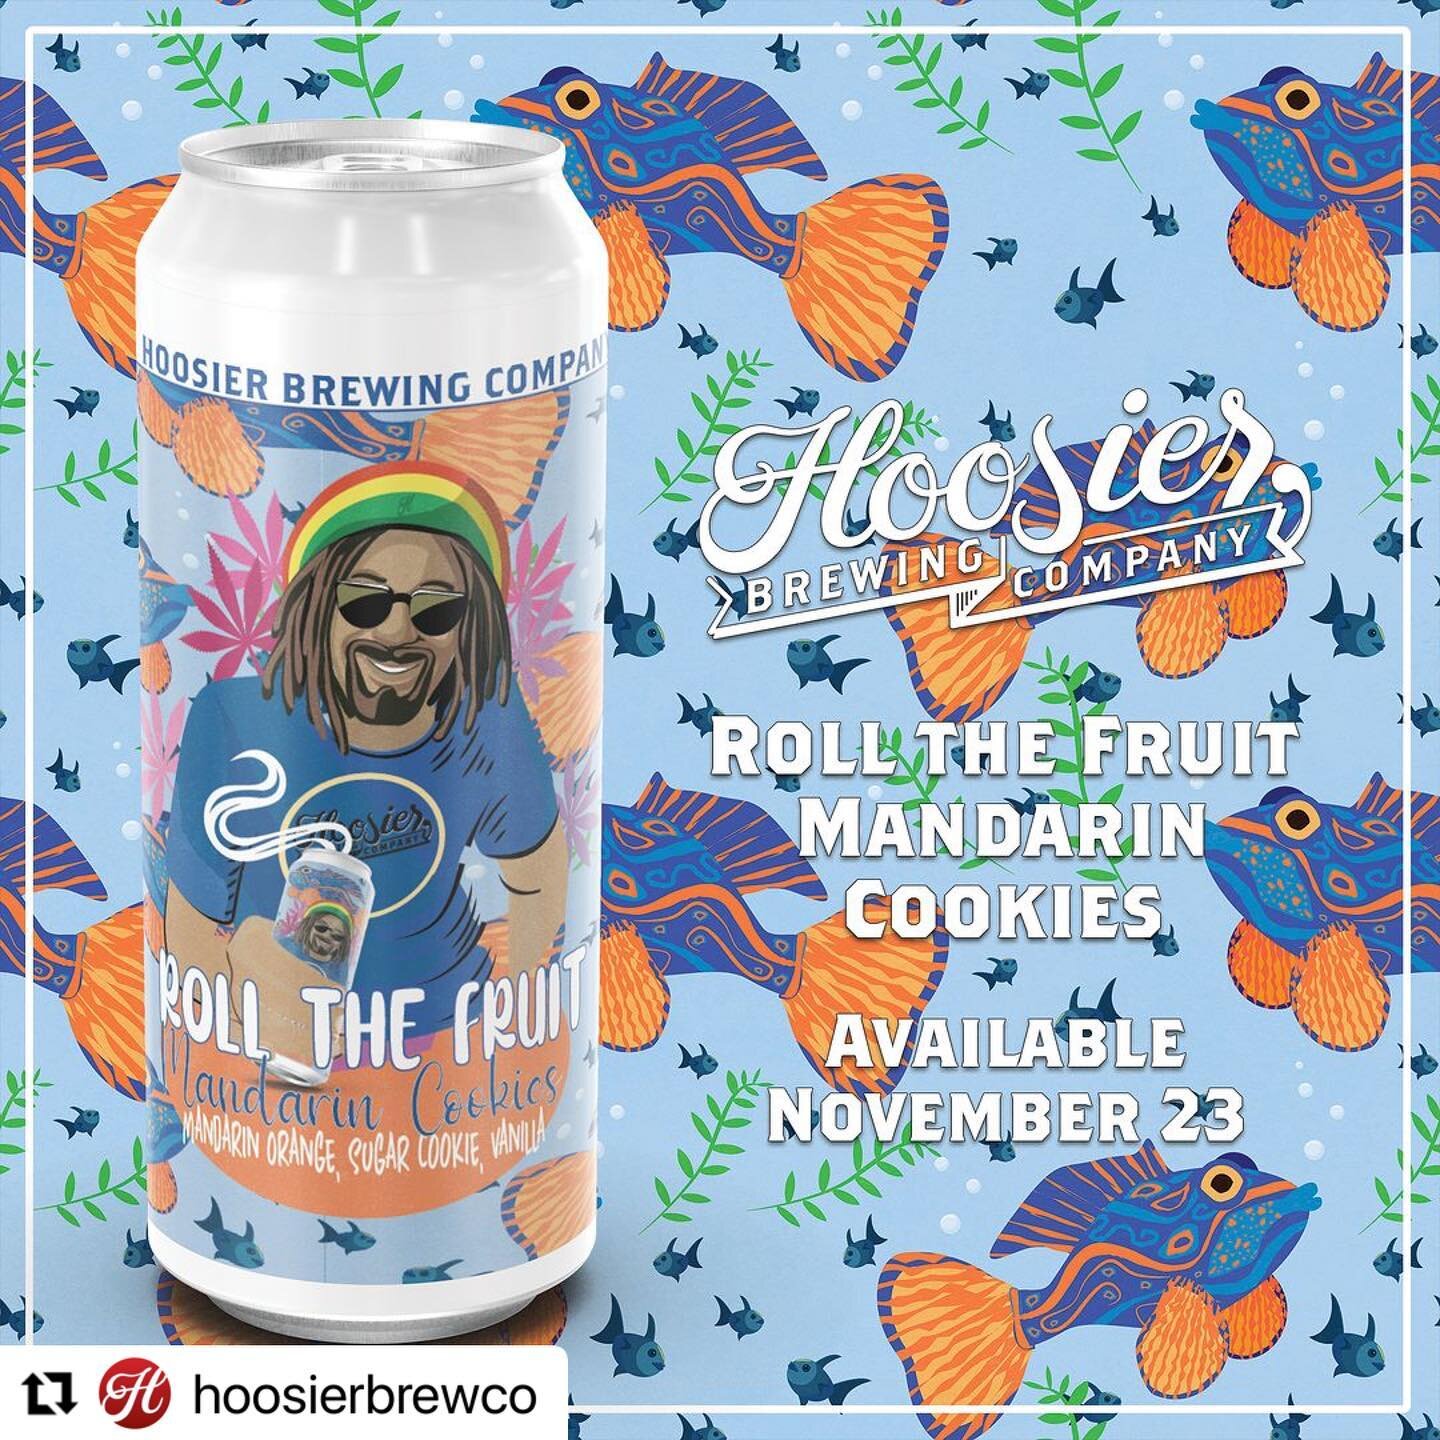 JUST ARRIVED!!!! @hoosierbrewco👇👇👇
🤯💣💥
1.) 🍊🍪🍦ROLL THE FRUIT - MANDARIN COOKIES 🍦🍪🍊: WE loaded this bad boy up with tons of Mandarin orange puree, kiwi, sweet orange, and a sugar cookie treatment! This one is solid... and super unique! 
2